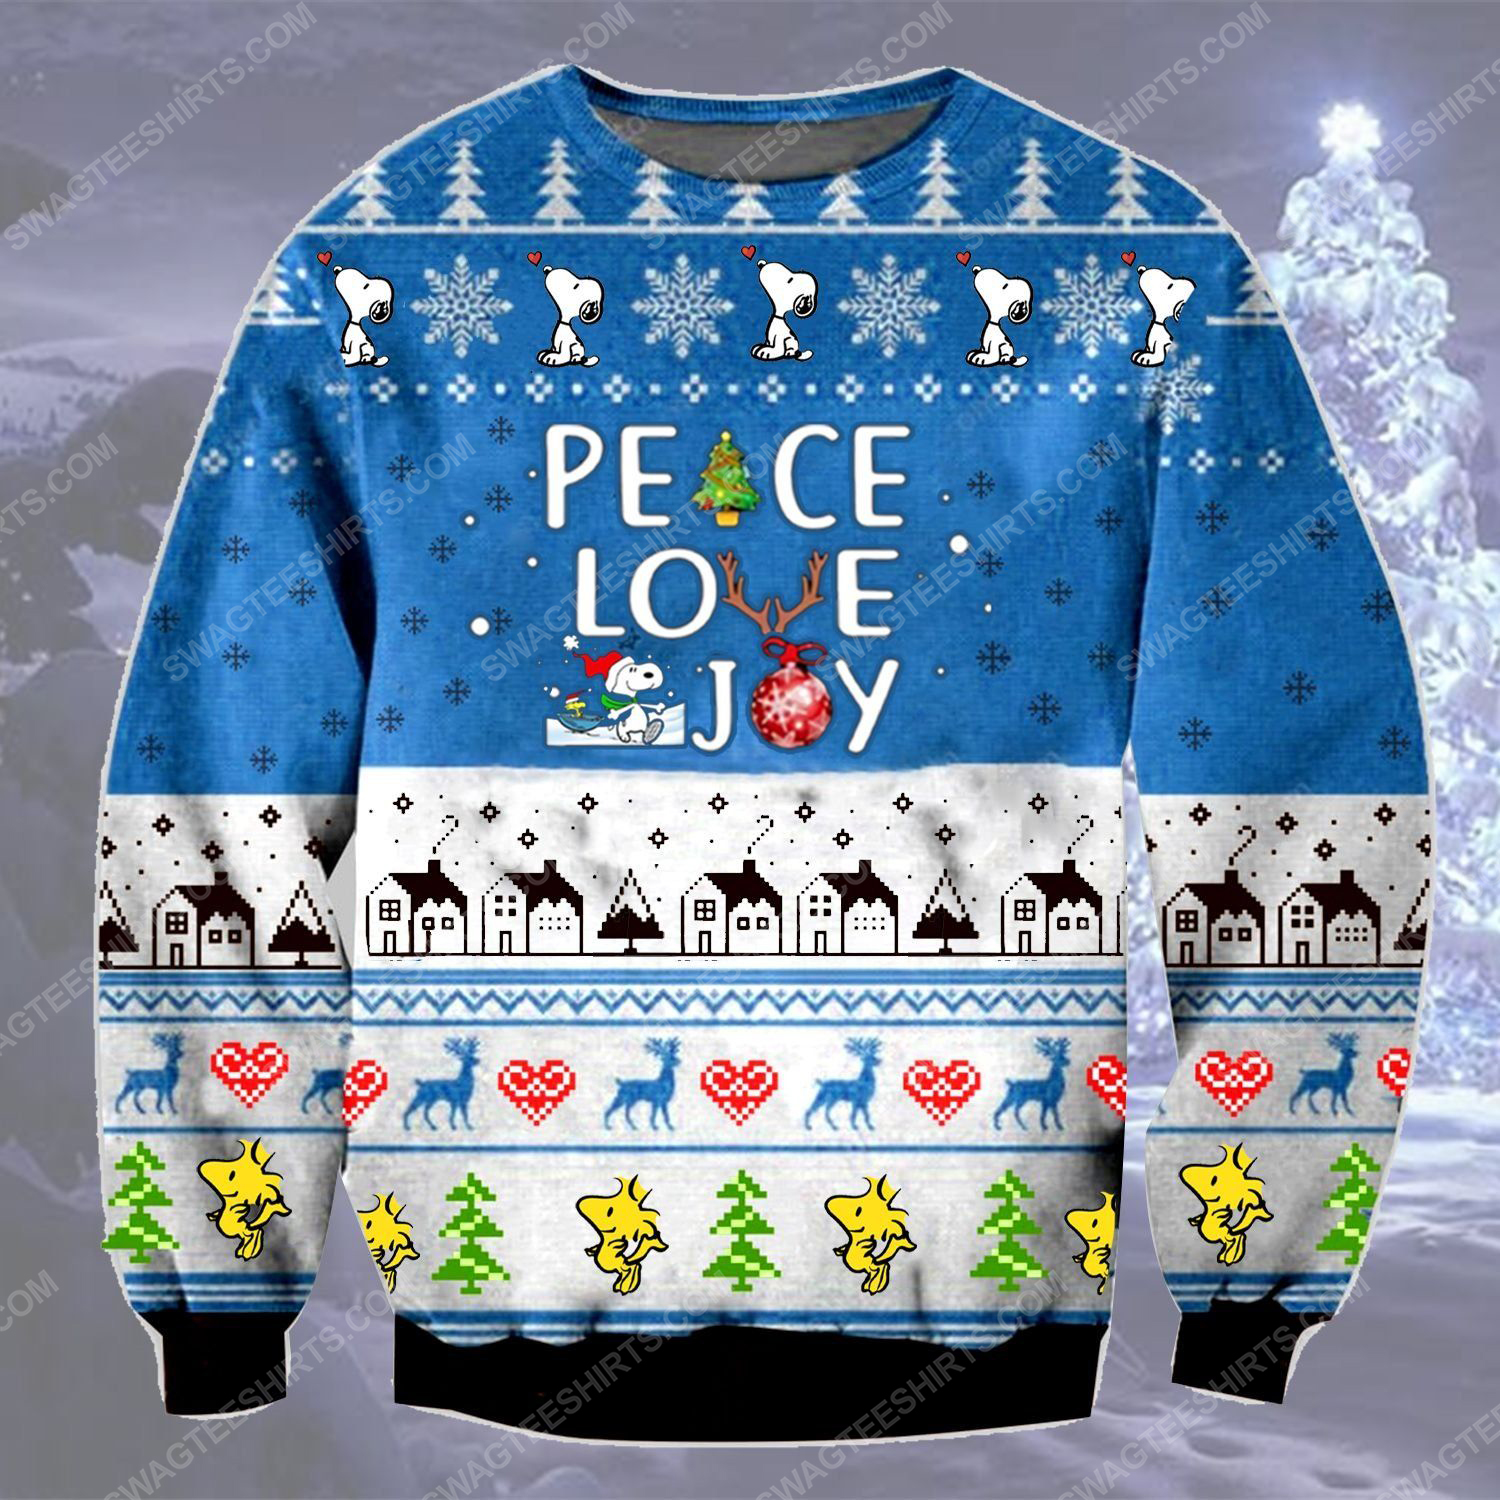 Charlie brown and snoopy peace love joy ugly christmas sweater